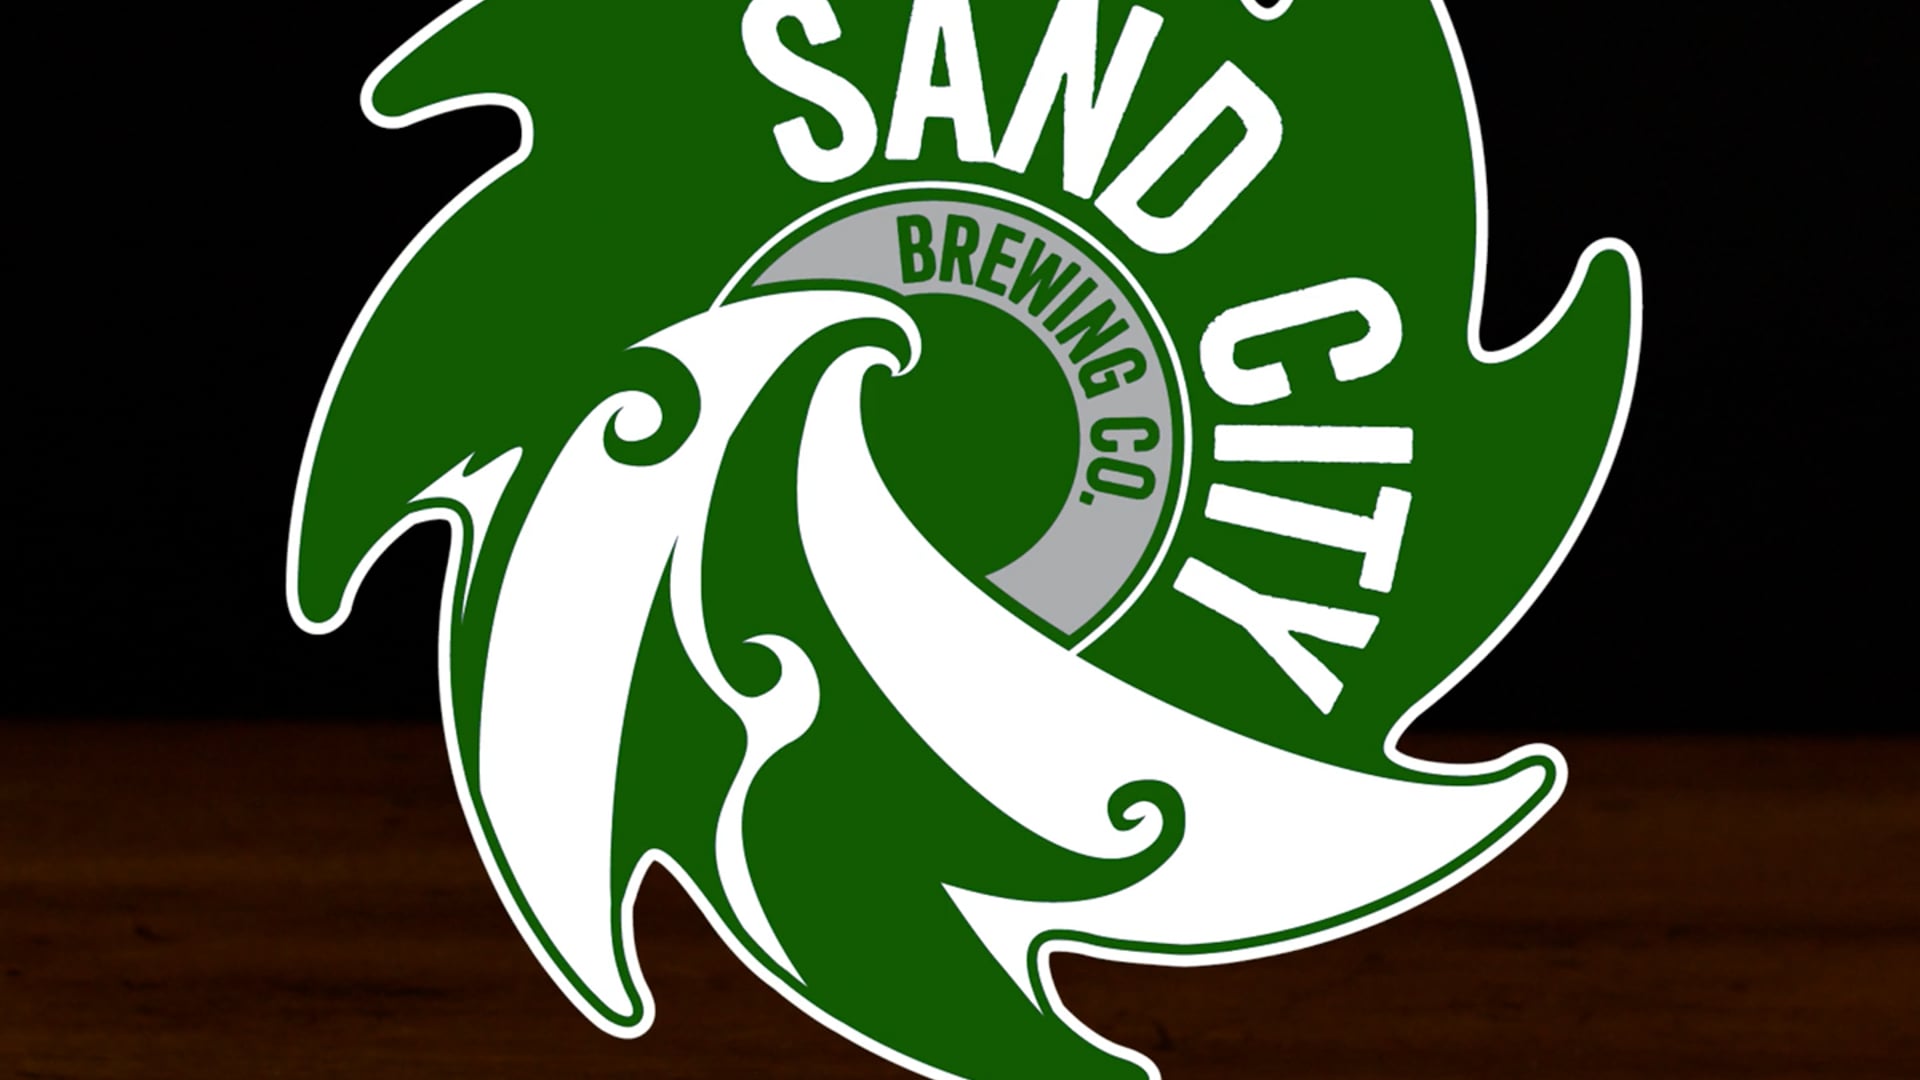 Sand City Brewing Co.